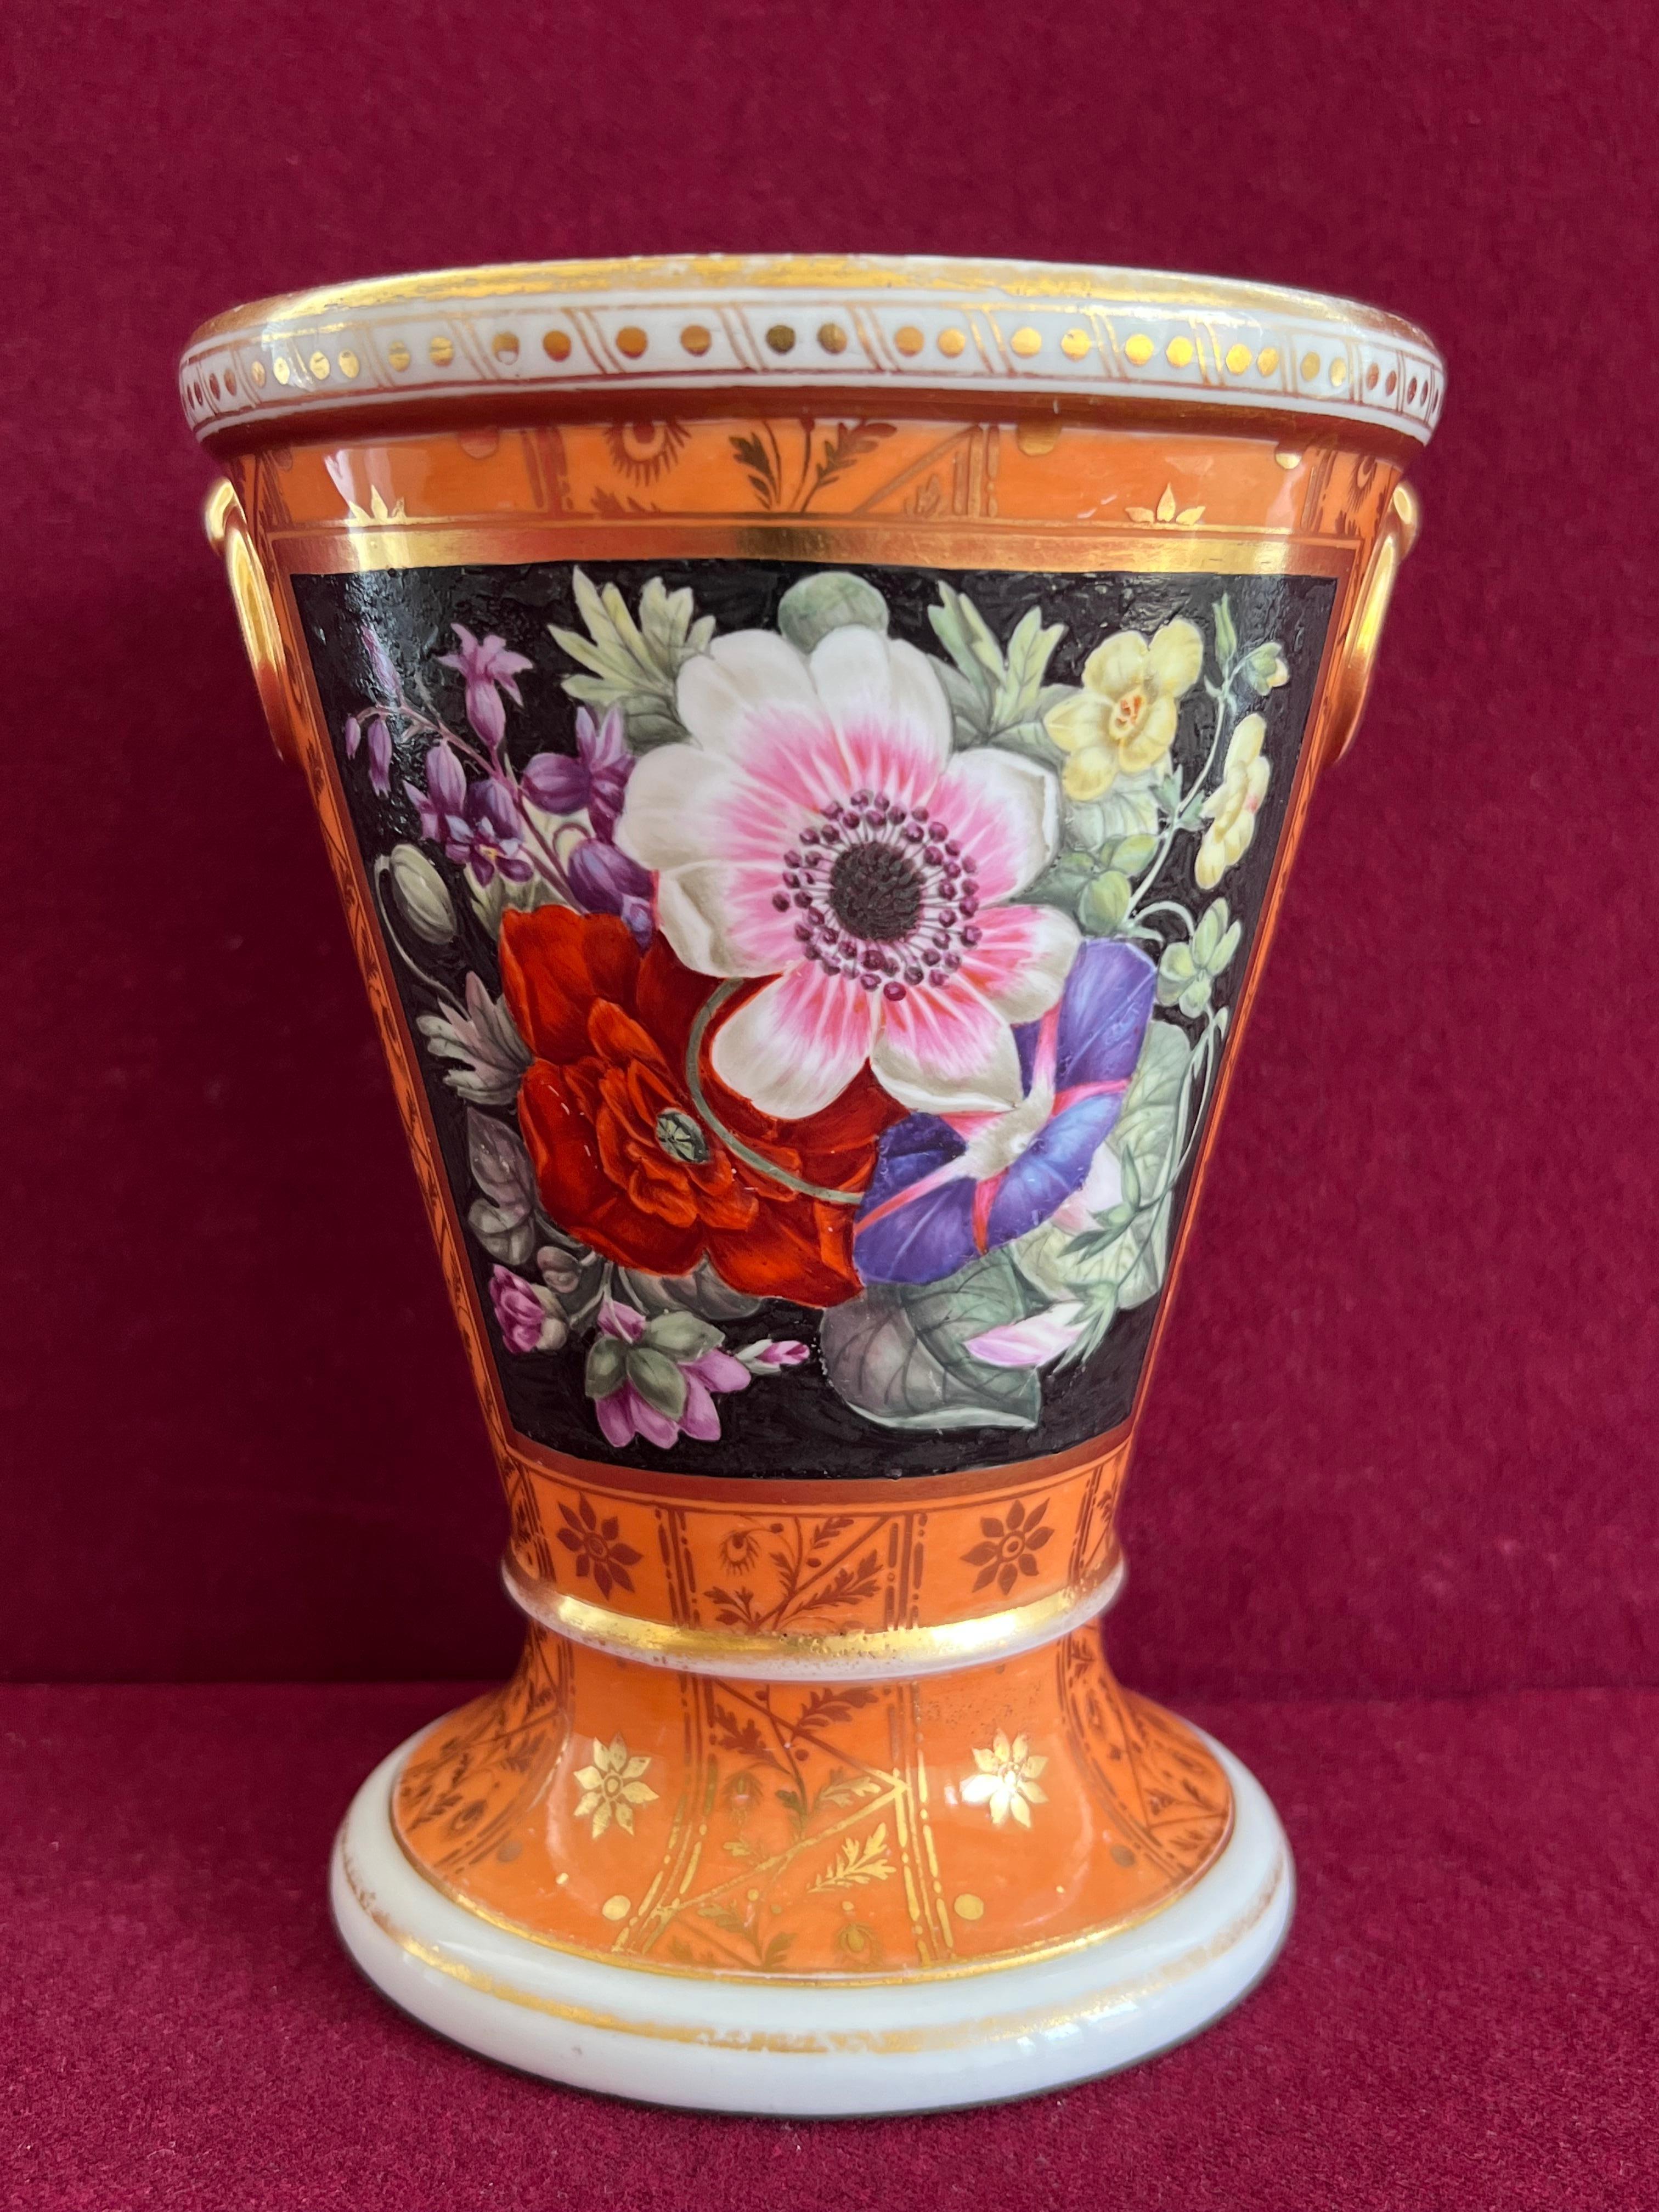 A flight and barr Worcester porcelain Jardiniere c.18001-1805 of flared tapering form, with fixed stand, two fixed gilt ring handles, painted with a panel of garden flowers on a black ground and gilded patterns on a salmon ground. Incised B mark to